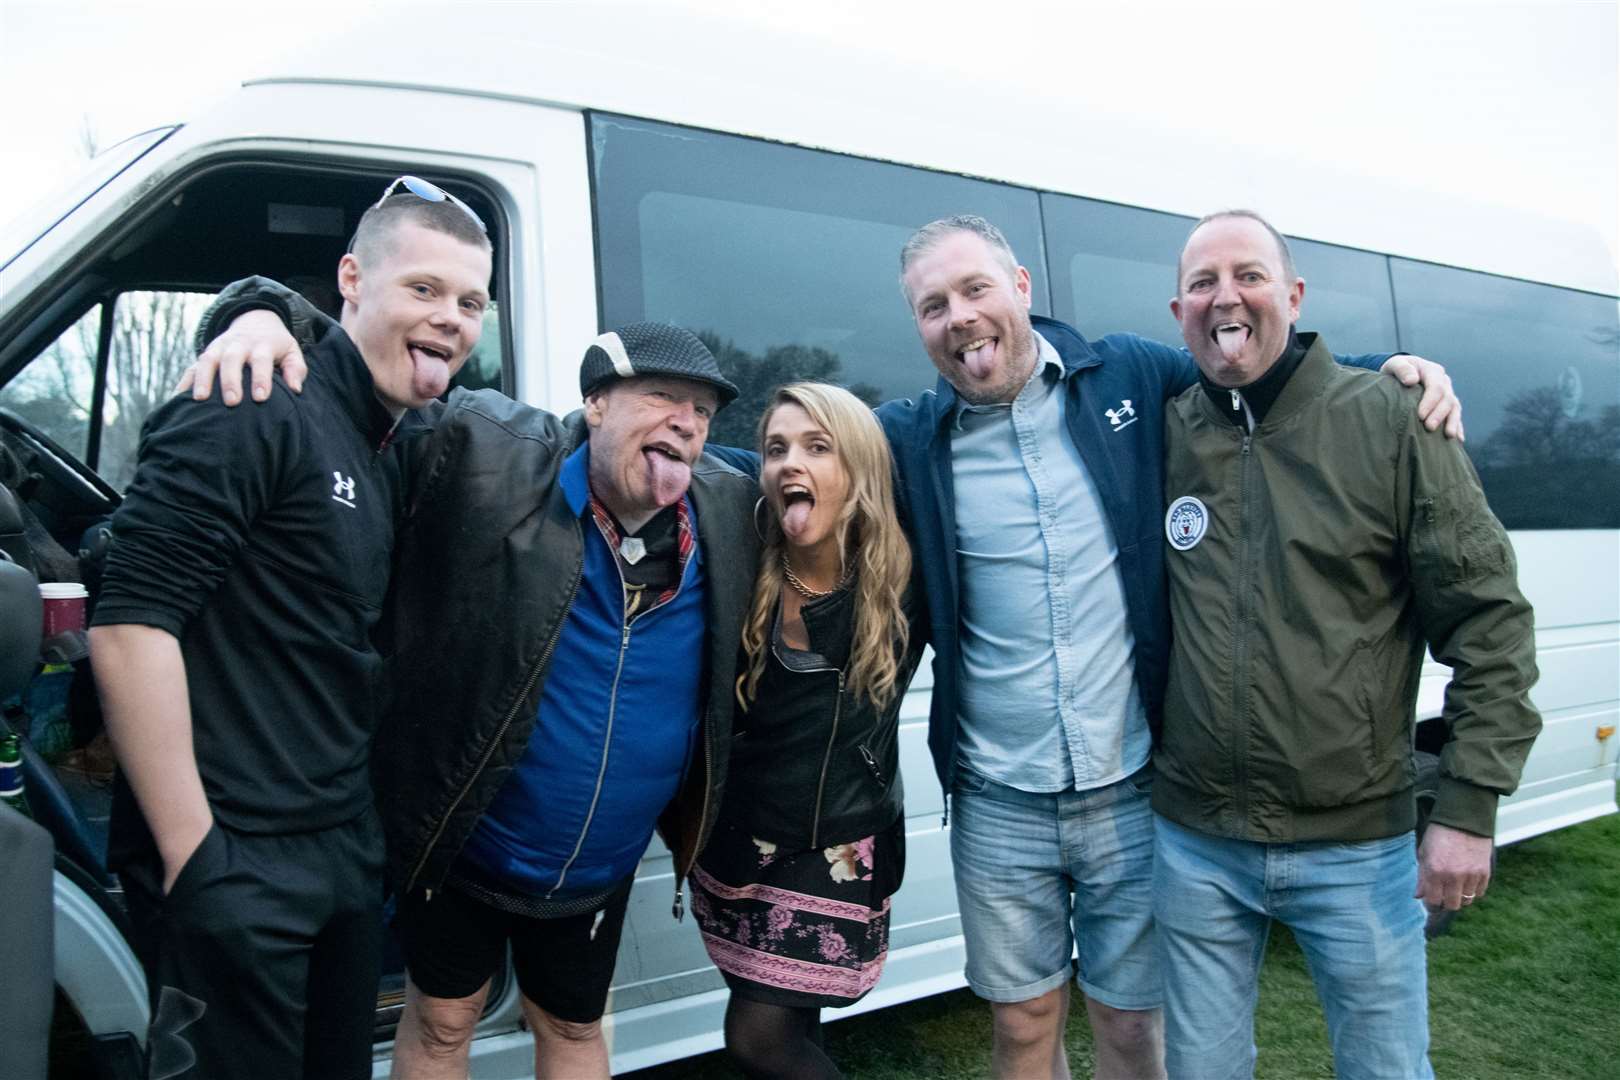 Sarah Mackay and friends with Bad Manners.